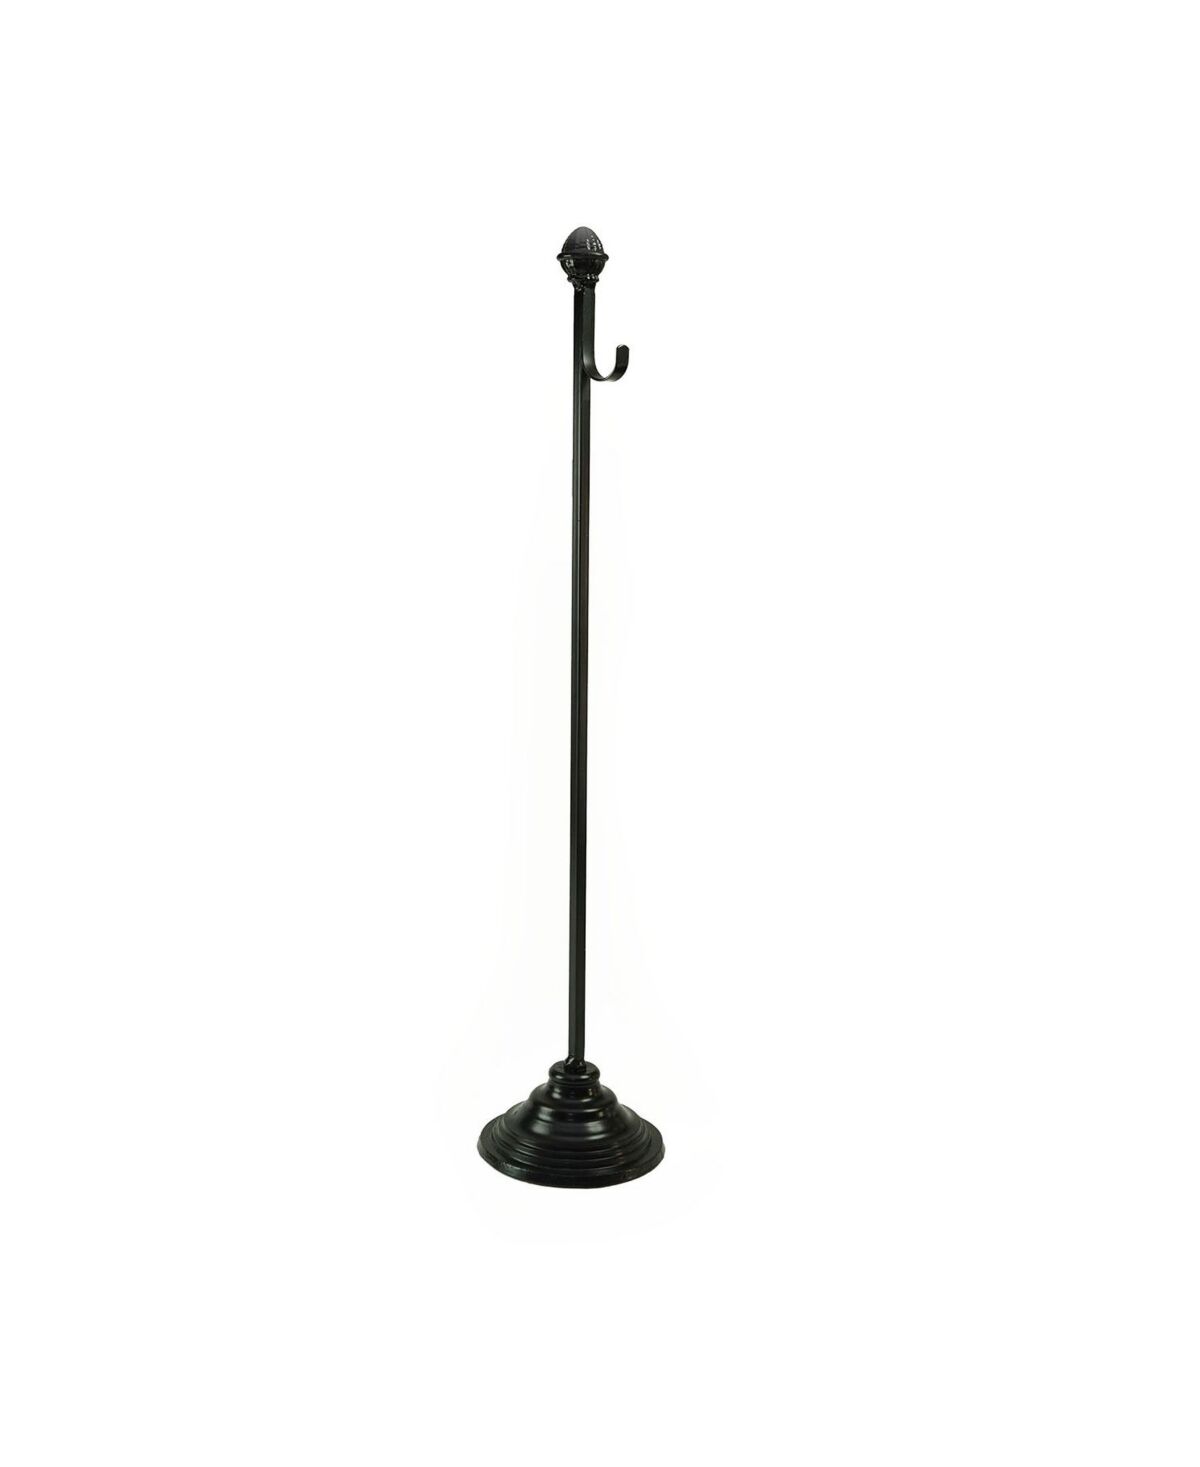 Northlight Solid Christmas Wreath Hanger Stand - Black